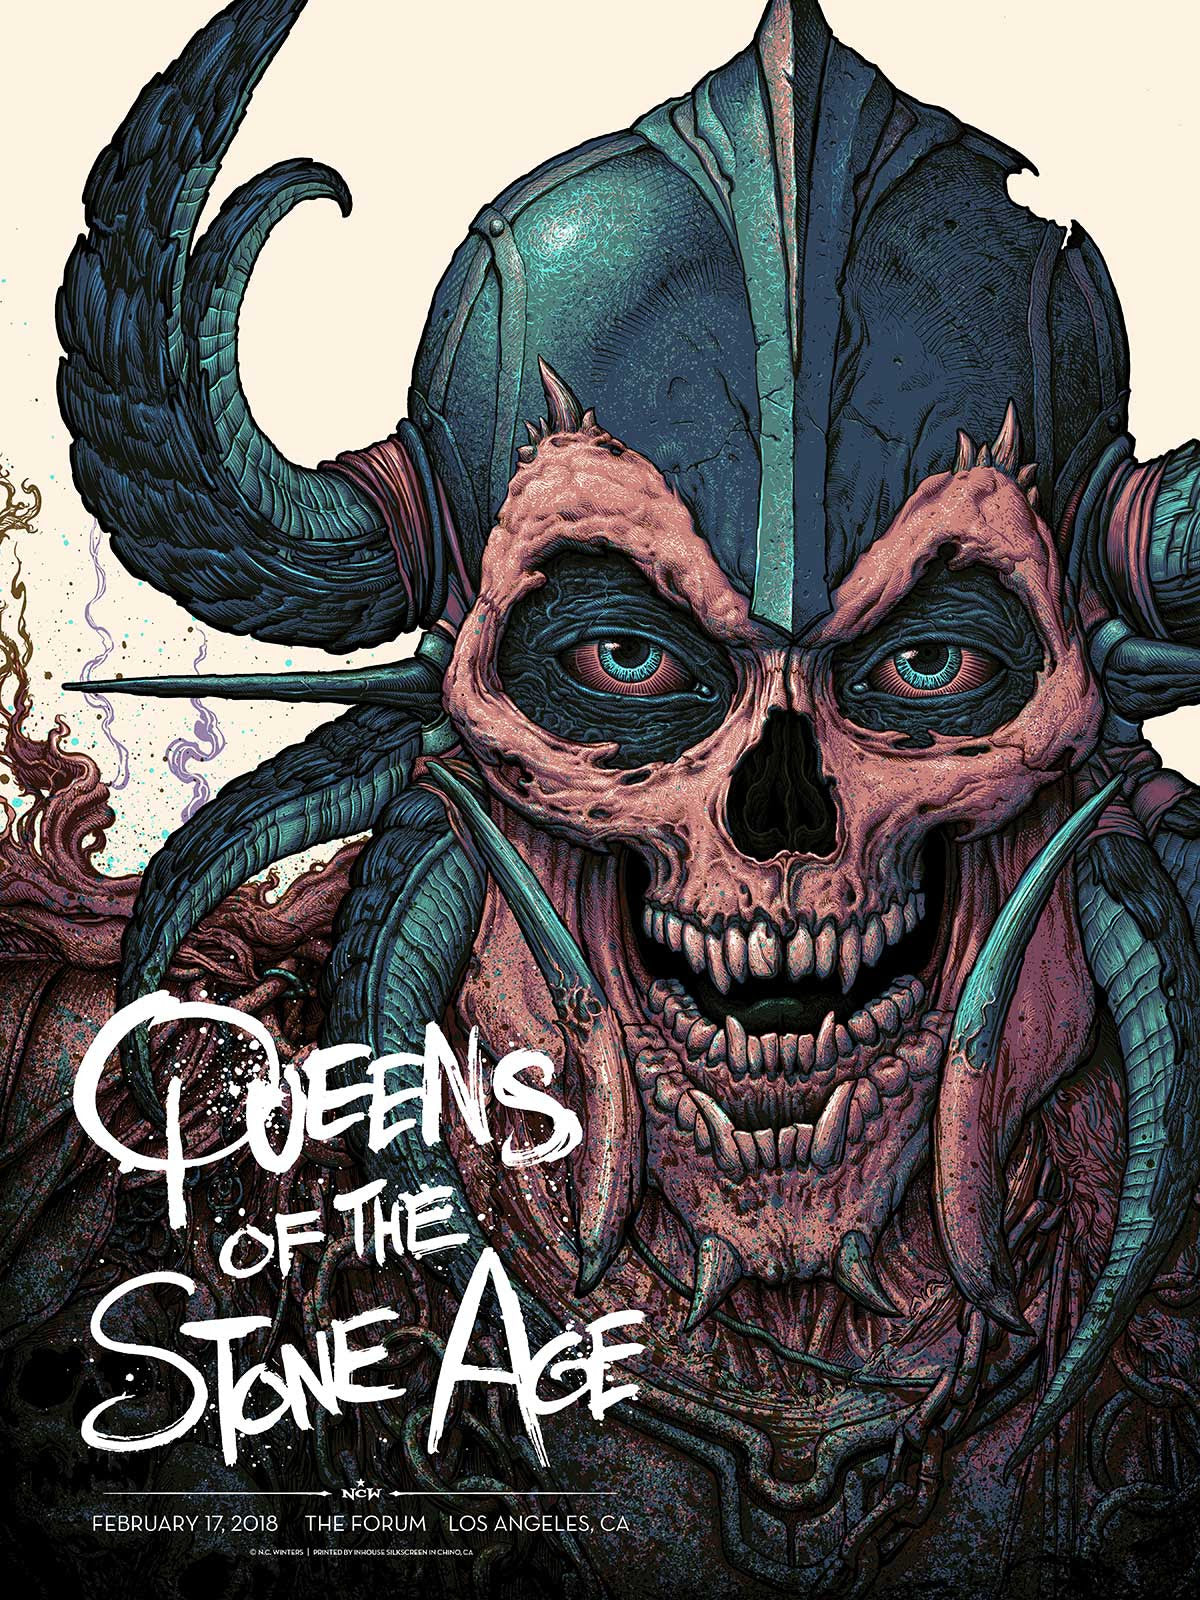 Title: QUEENS OF THE STONE AGE: L.A. FORUM GIG POSTER Kraft Variant  Artist: N.C. Winters  Edition: Limited Edition Screen Printed Poster of 40, signed and numbered by the artist.  Type: Six-color screenprint, Kraft variant (artist colorway on kraft stock):  Size: 18" x 24"  Location: Los Angeles, CA  Venue: The Forum